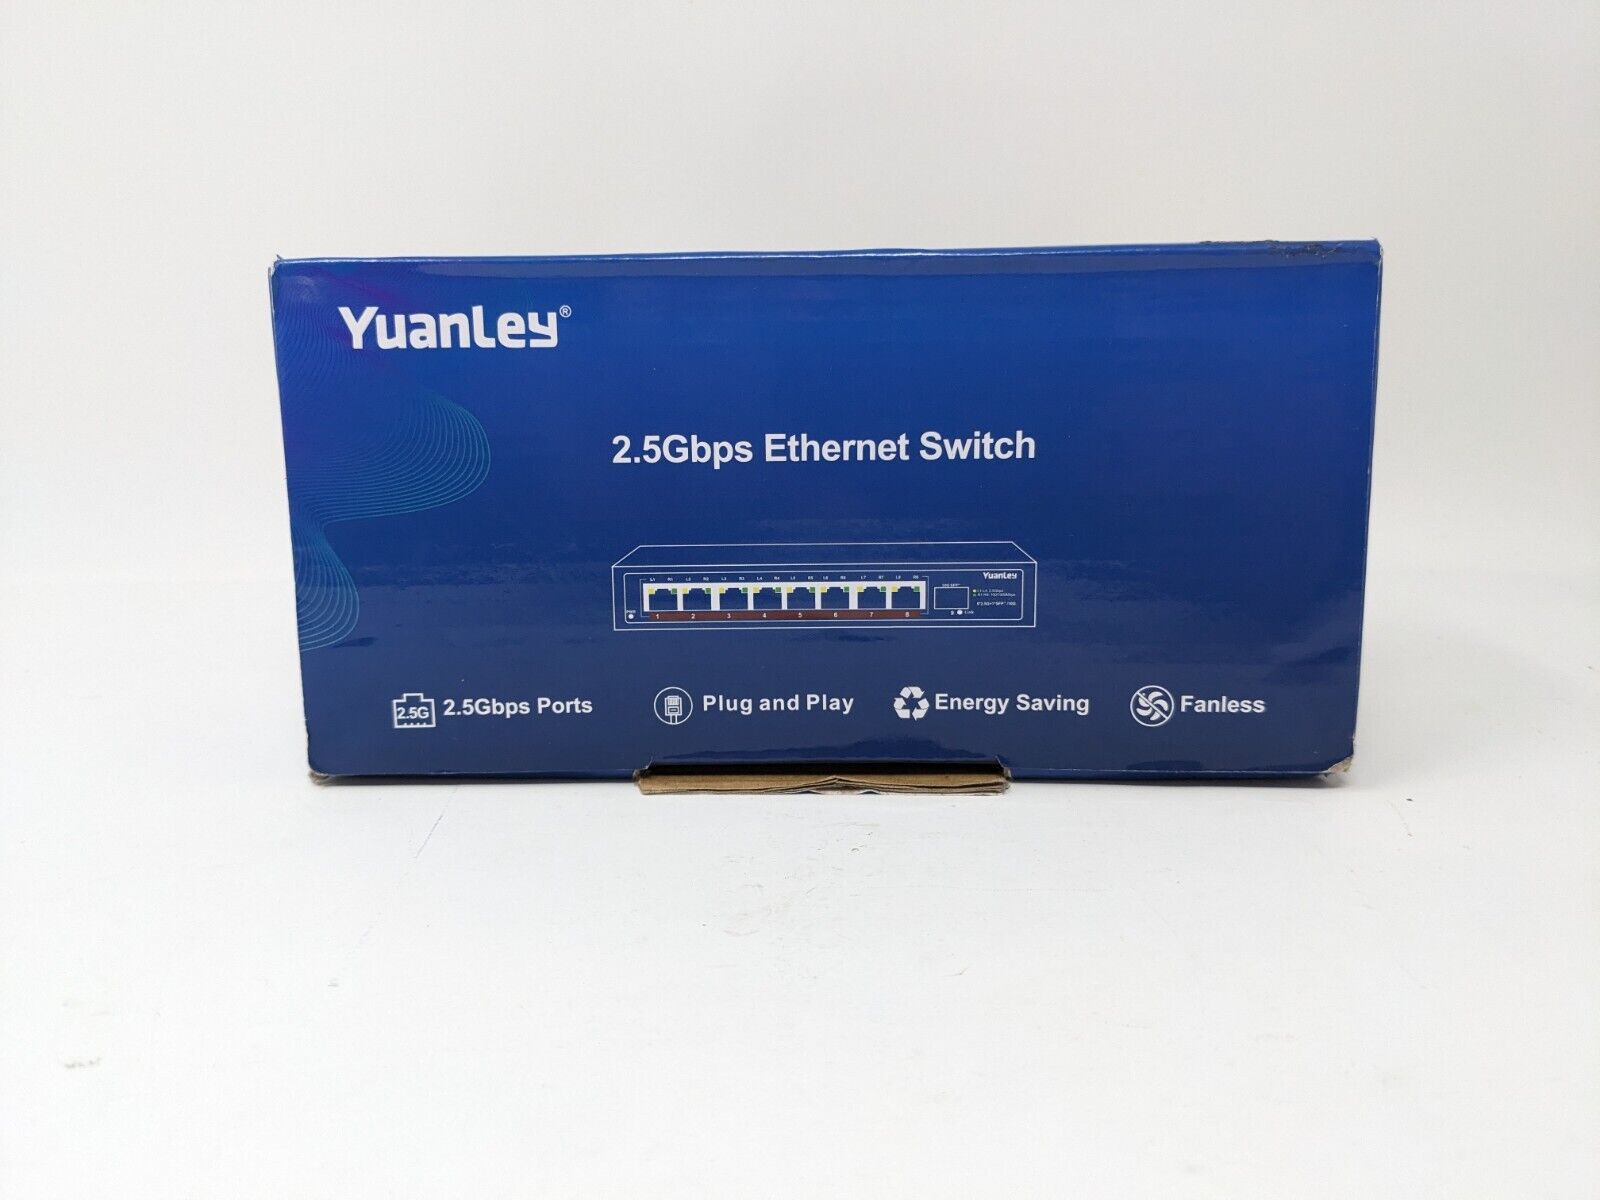 Yuanley 8 Port 2.5gbps Ethernet Switch YS25-801